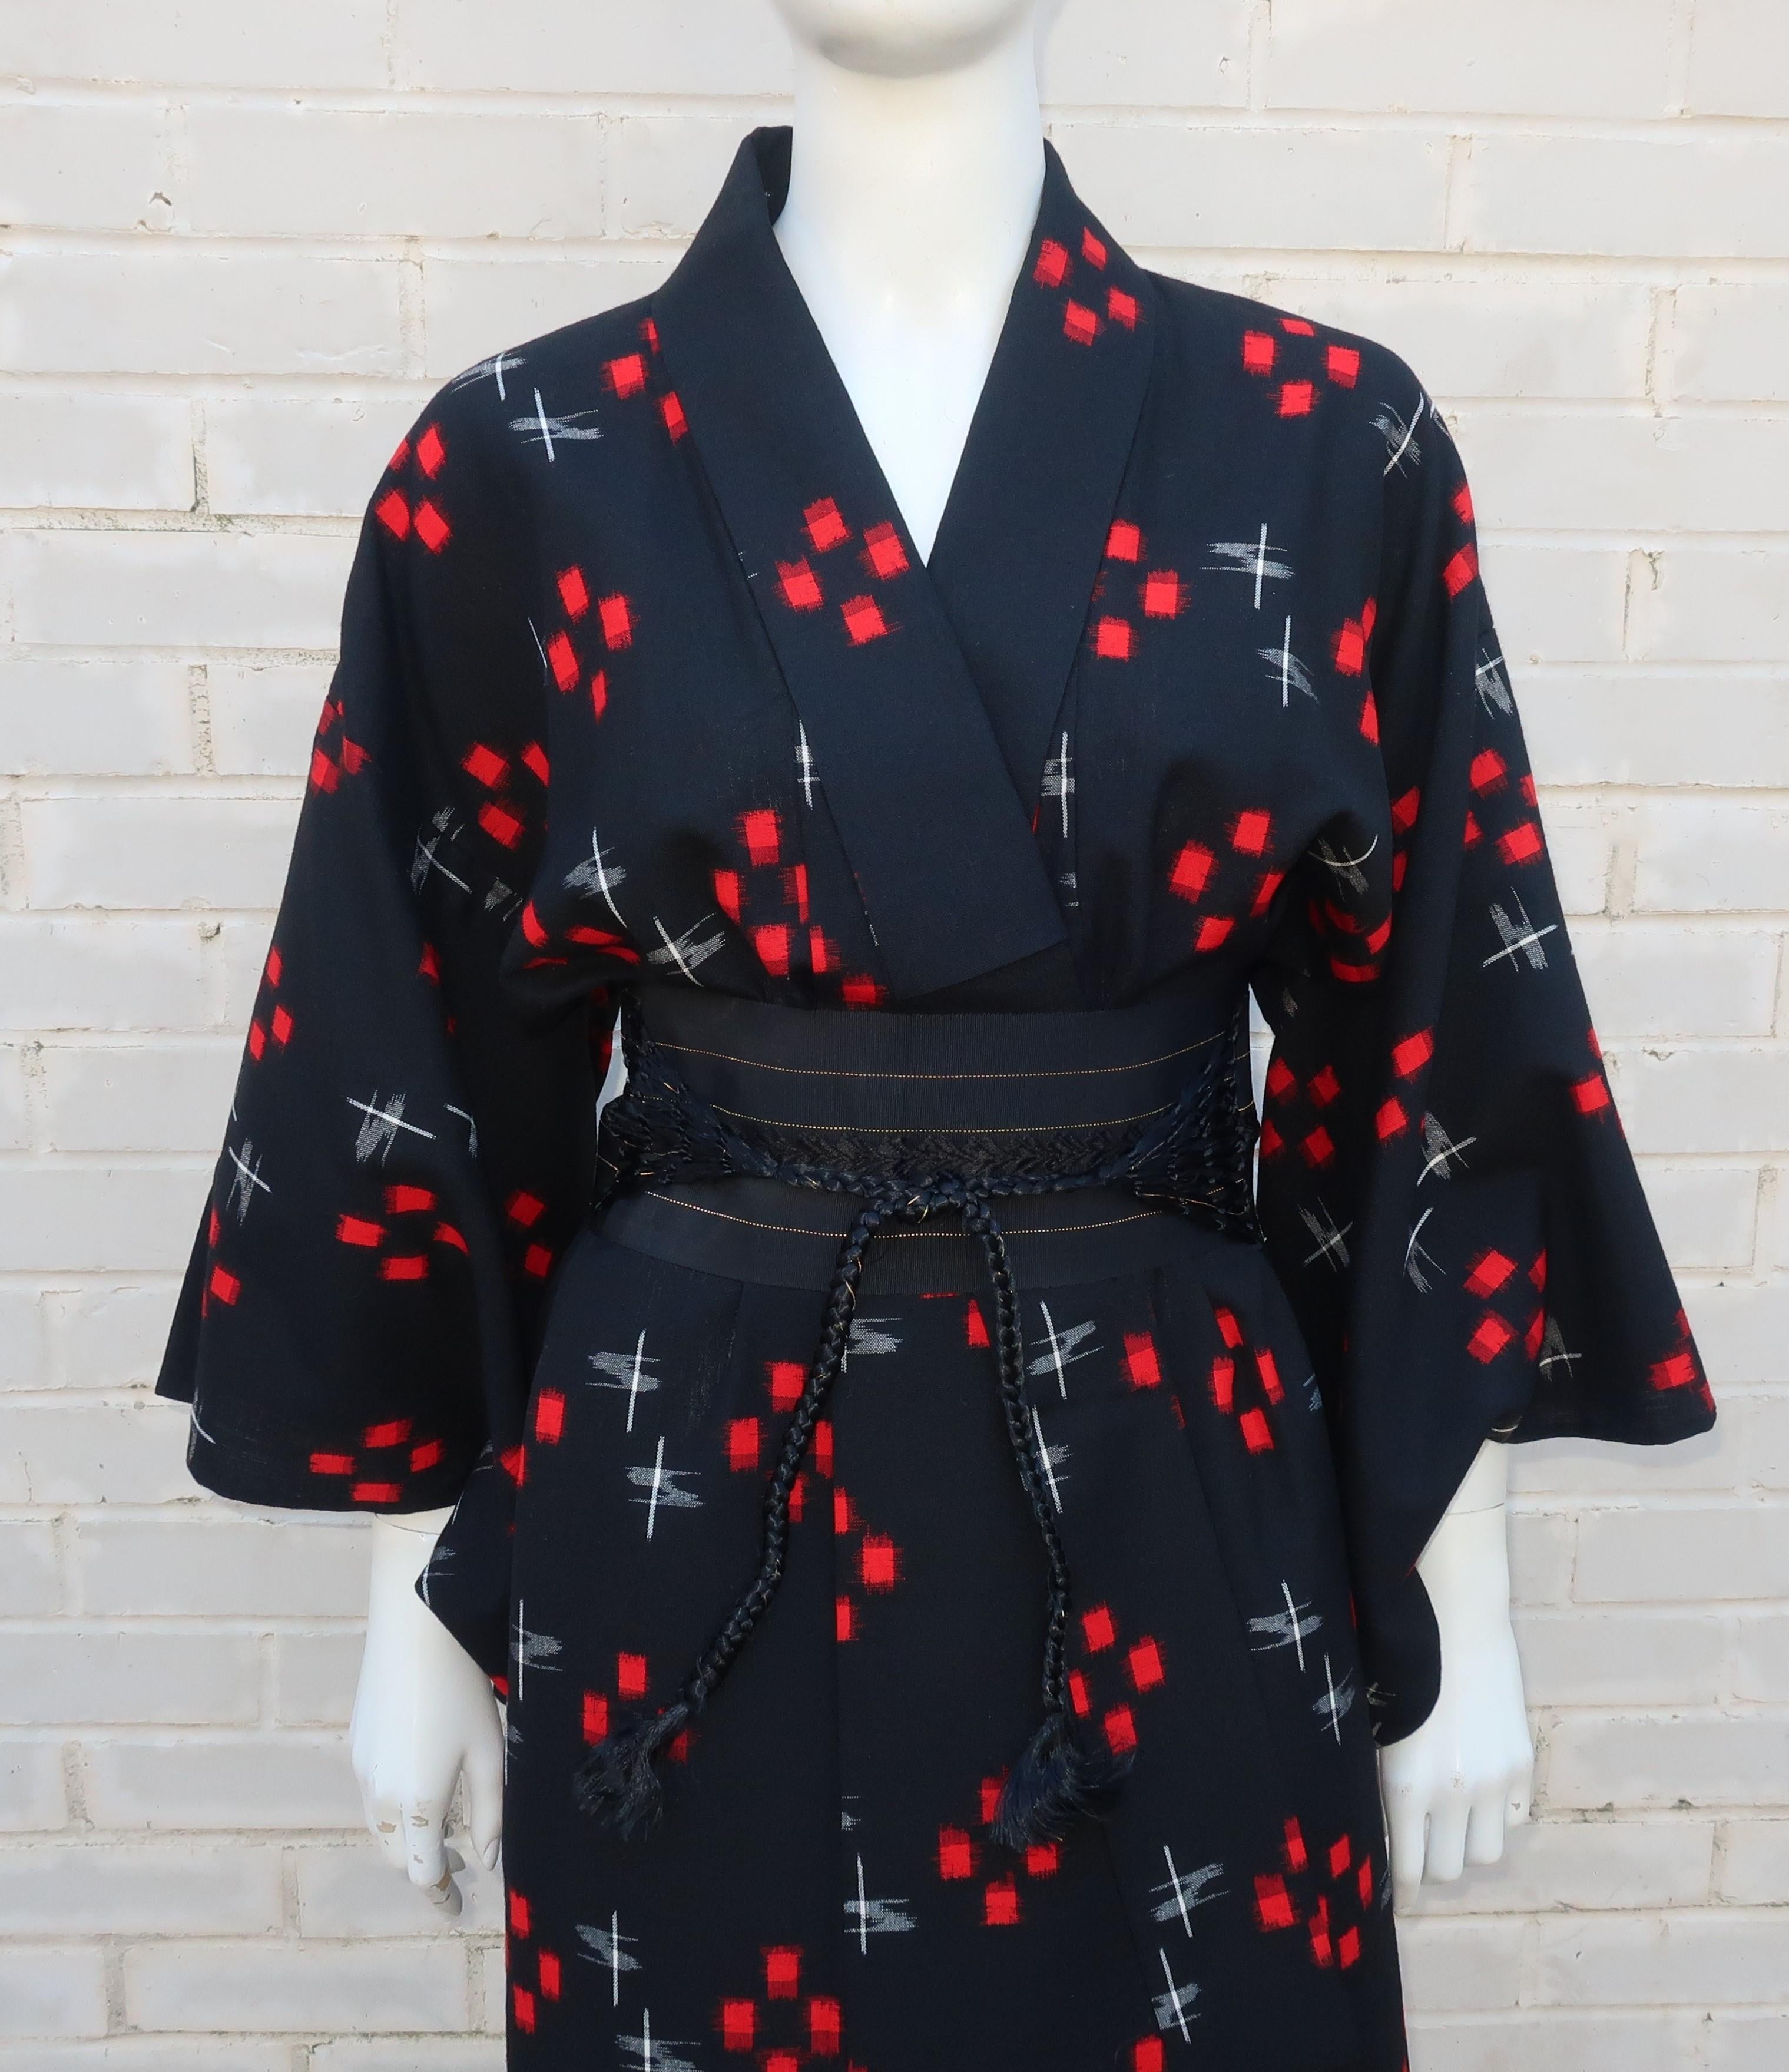 This mid 20th century kimono robe is a fashionable combination of a traditional Japanese silhouette and a modernist red and white starburst pattern on a black background.  The lightweight wool blend is a departure from the ultra feminine silk robes,